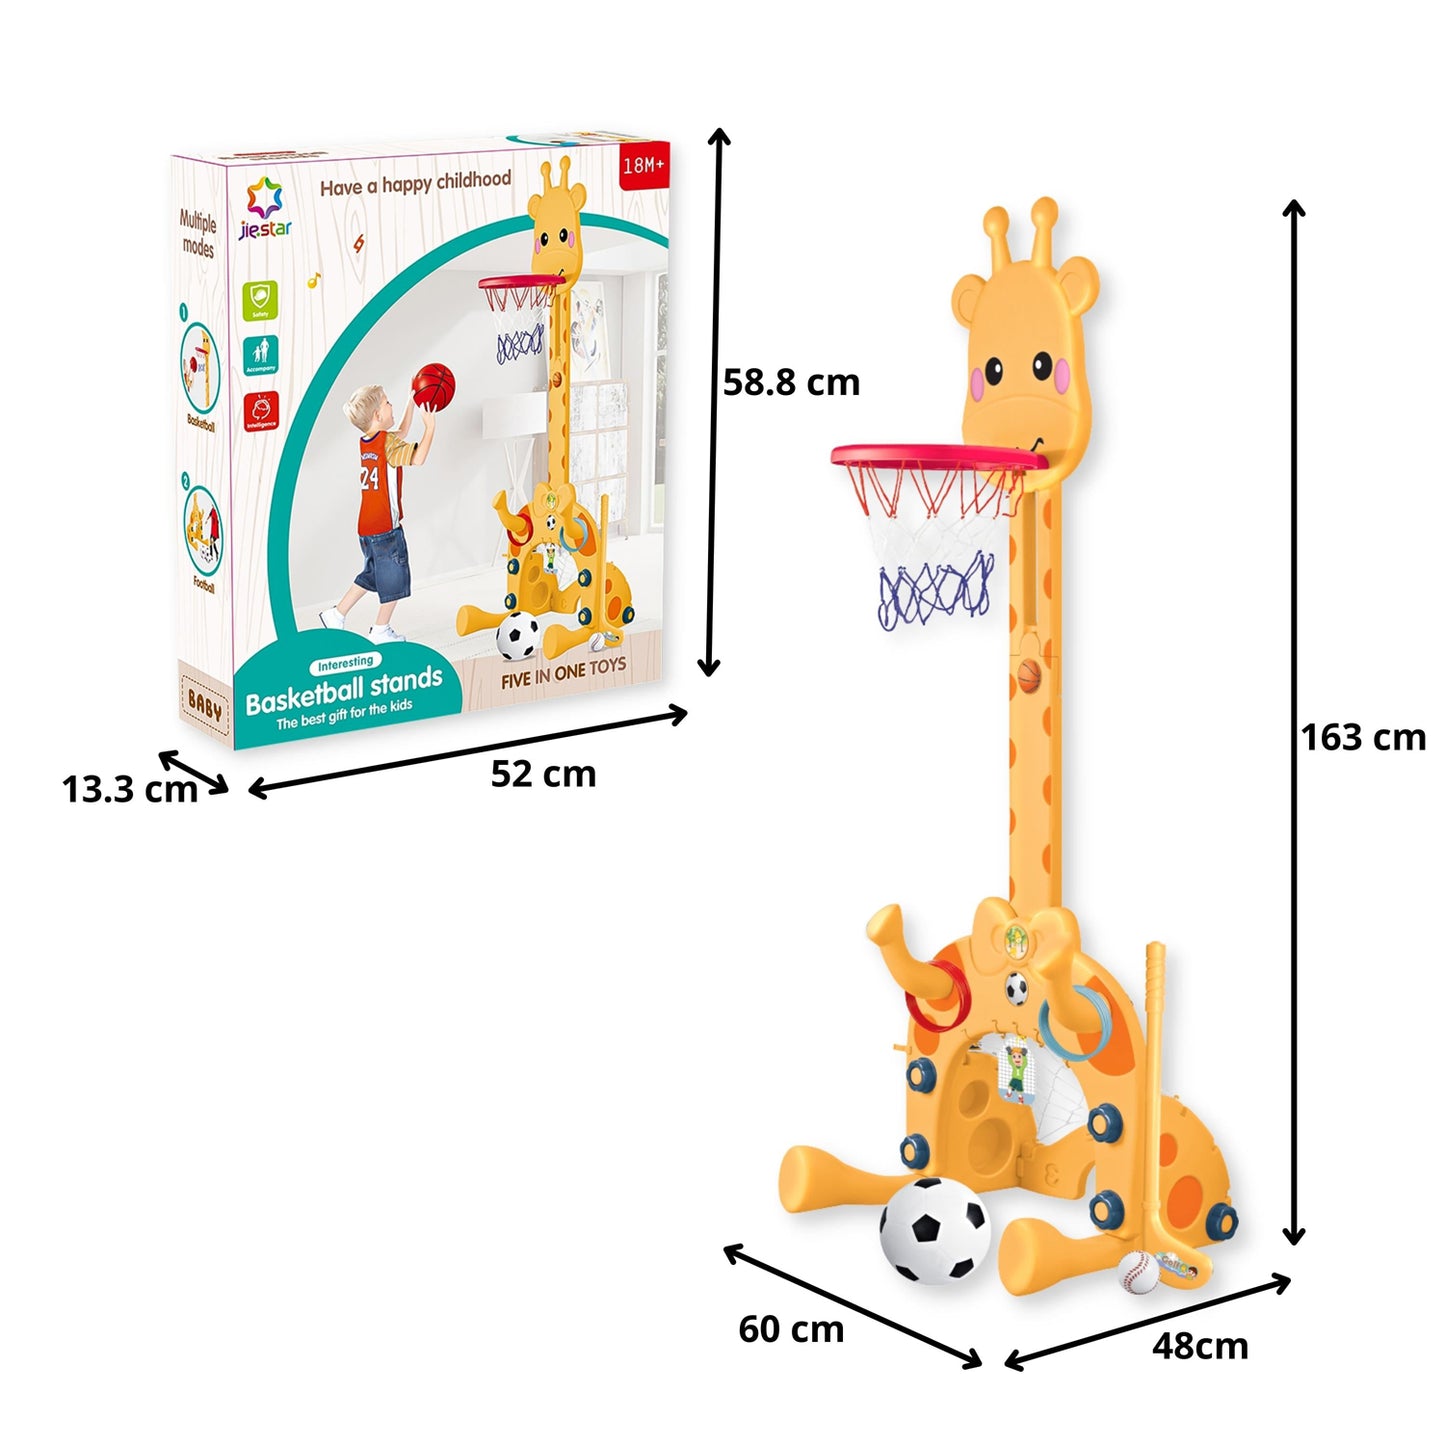 FITTO 4-in-1 Kids playset, Basketball